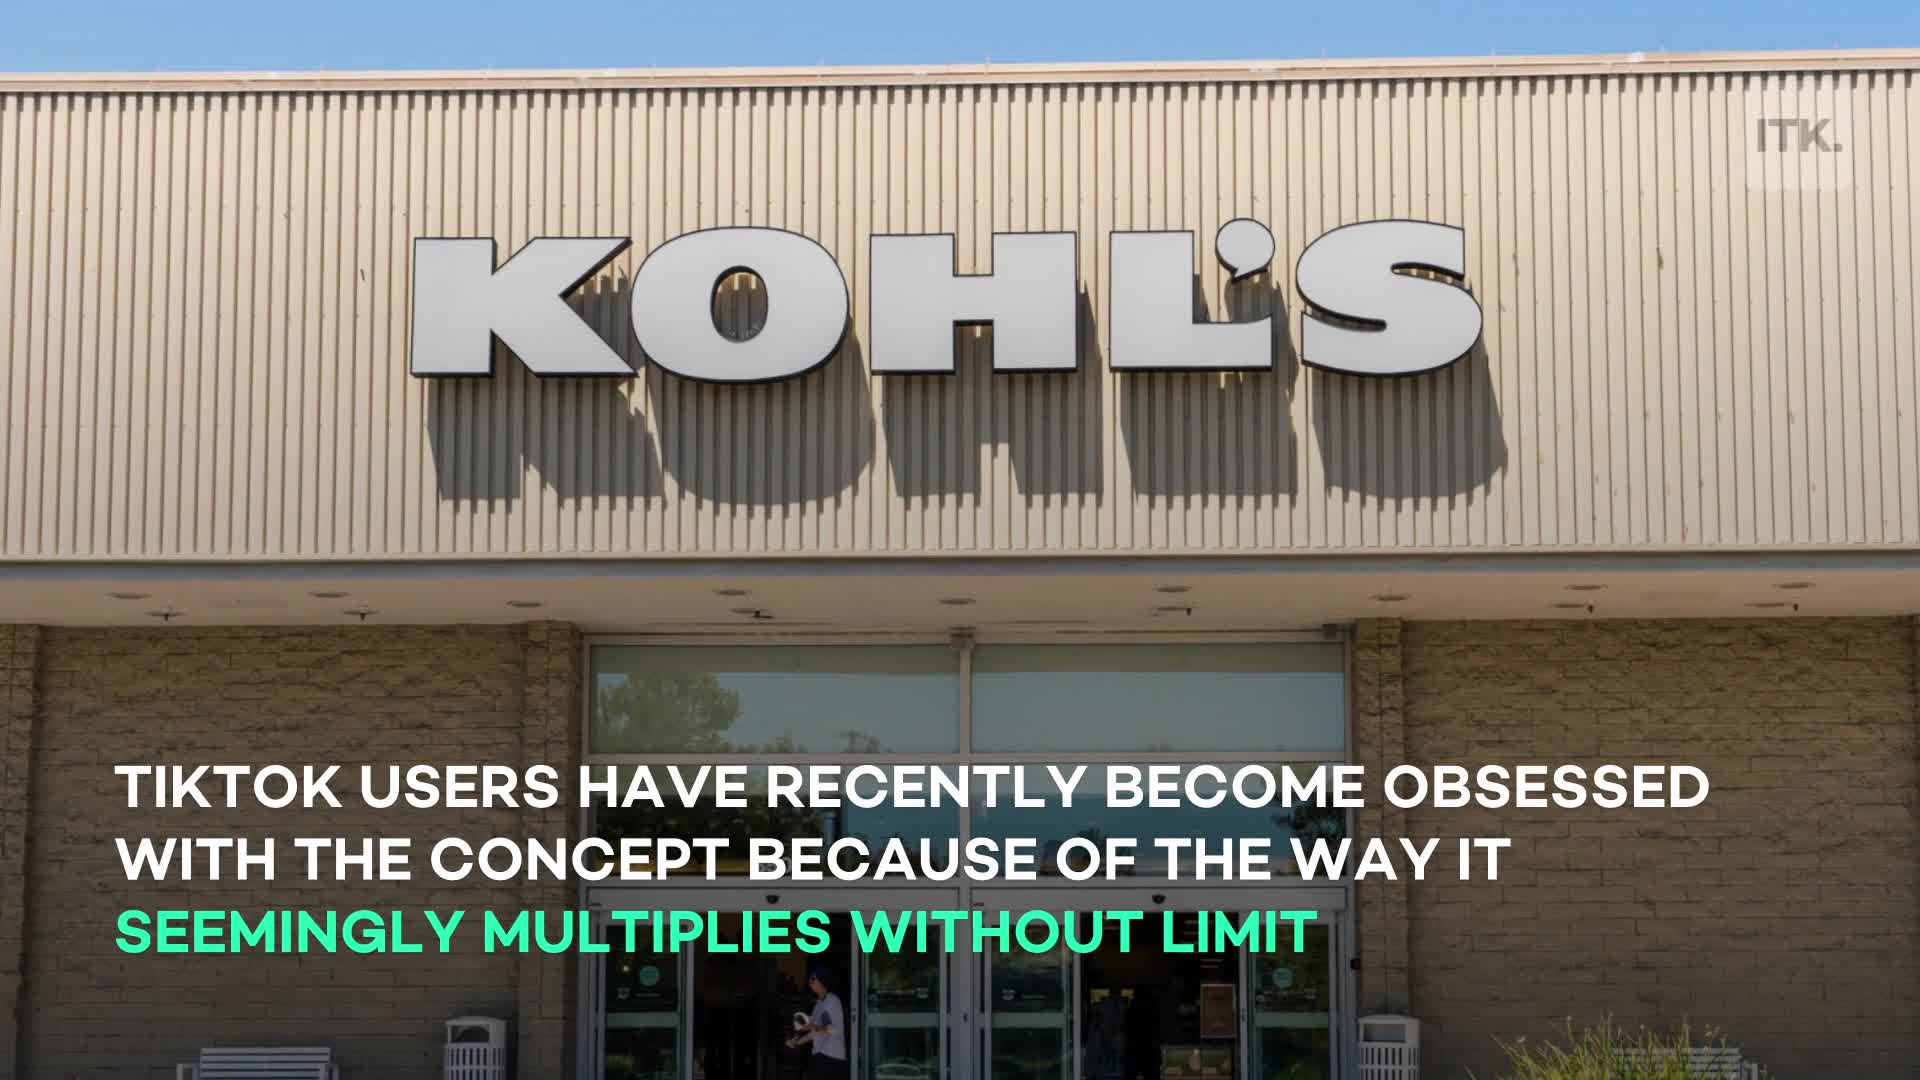 Why is TikTok so obsessed with Kohl's Cash? Let us explain